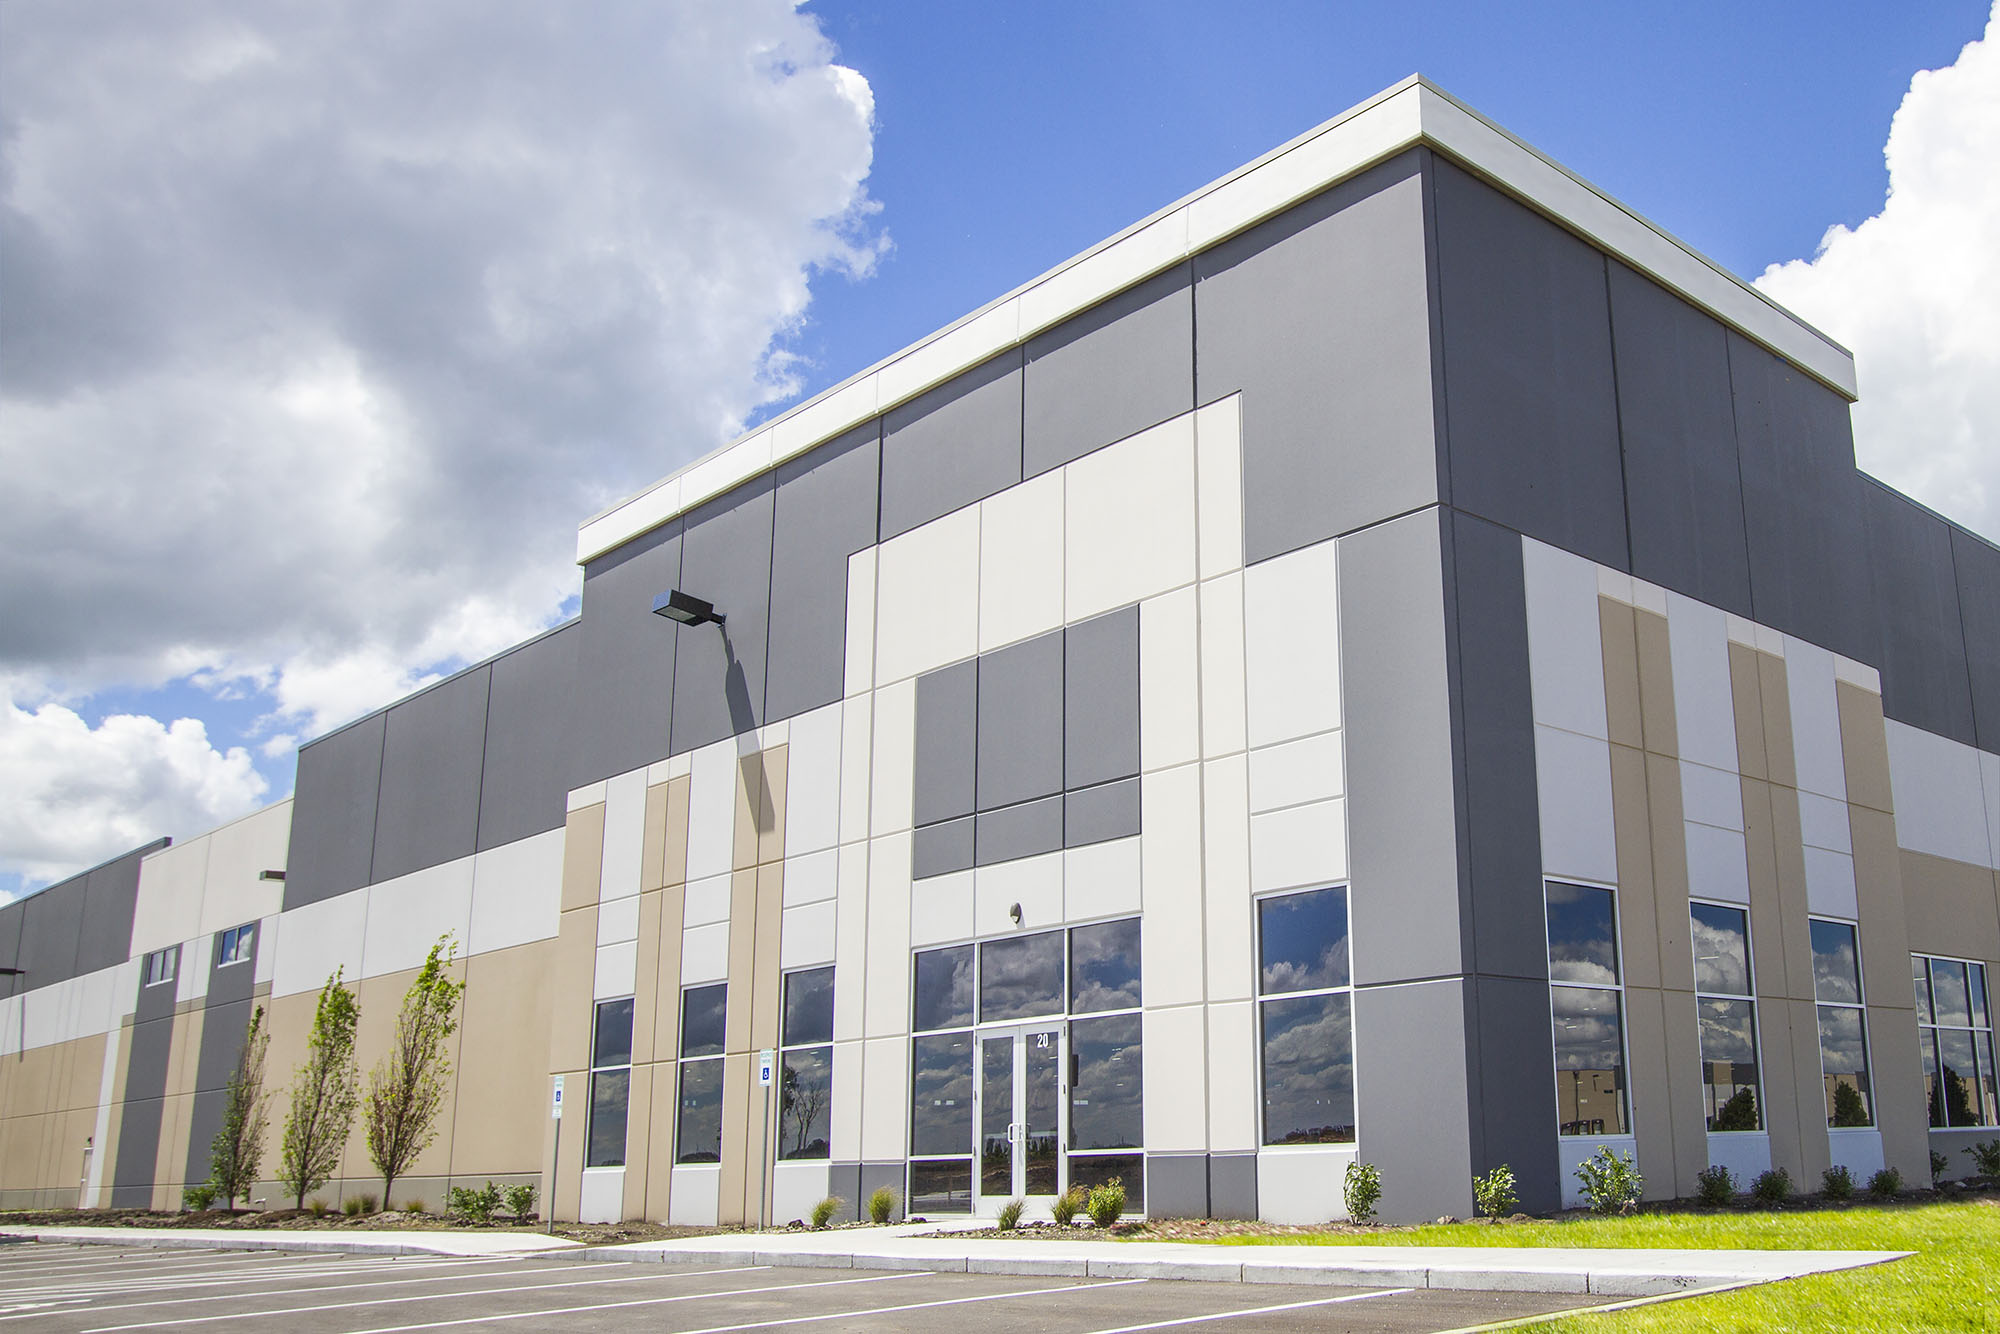 Tampa Airport Logistics Center, a ±297,254 SF master-planned industrial project, breaks ground in market with high demand for large blocks of space